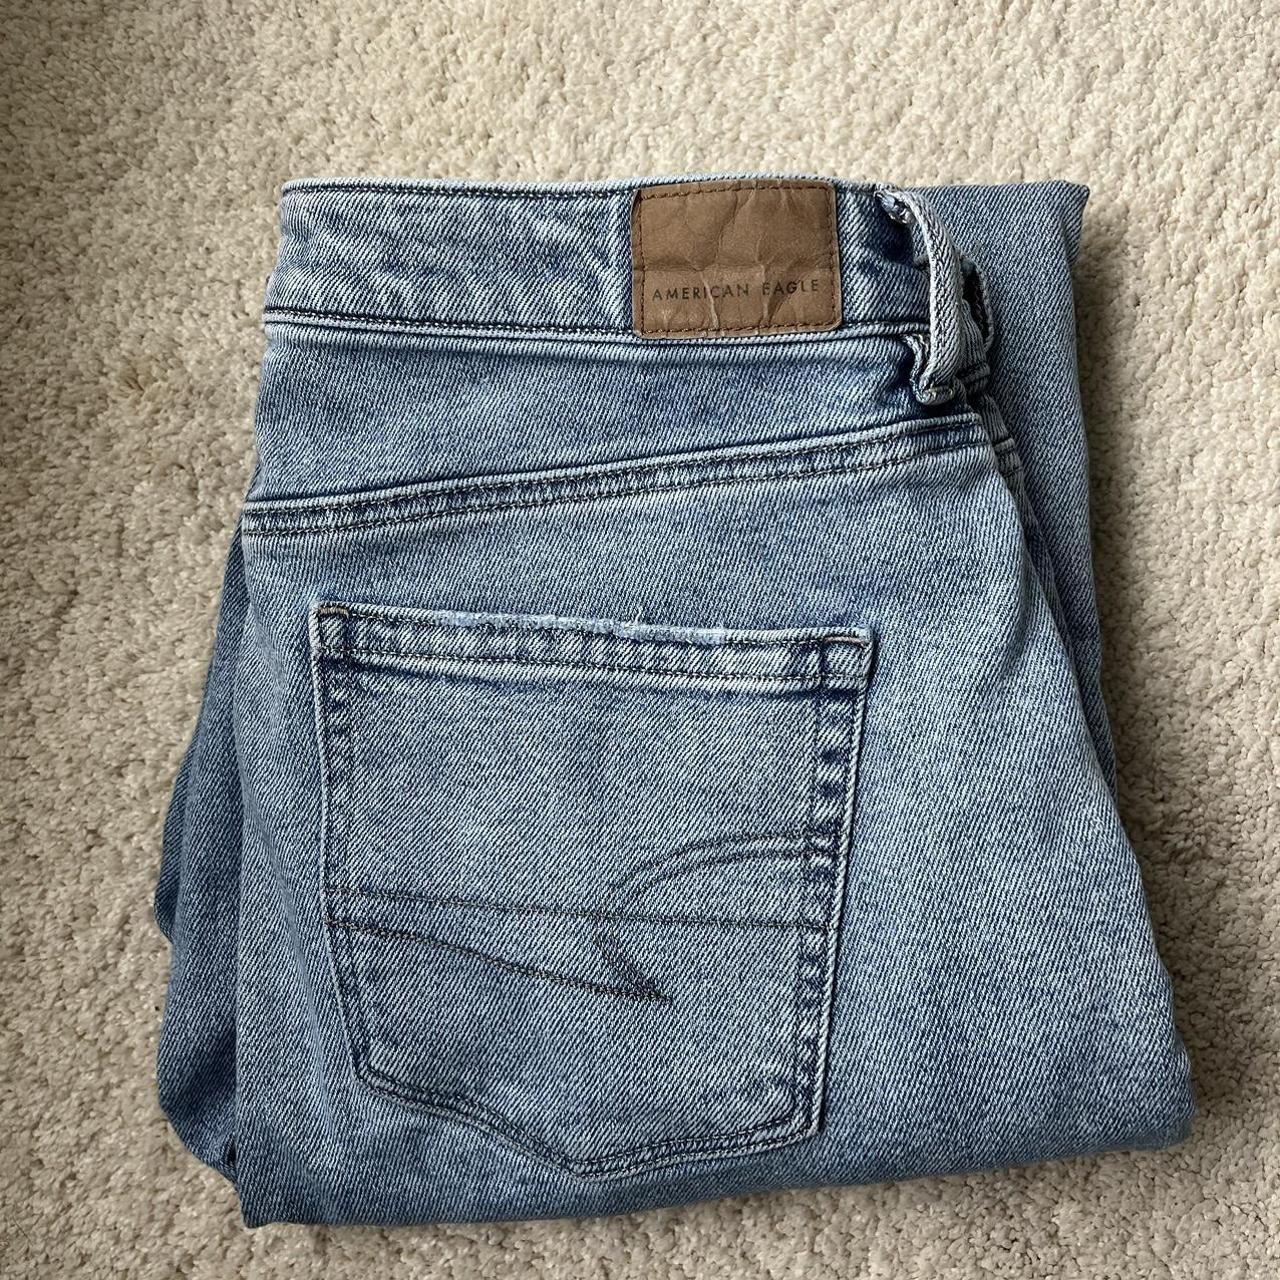 American Eagle Women's Blue and Navy Jeans | Depop